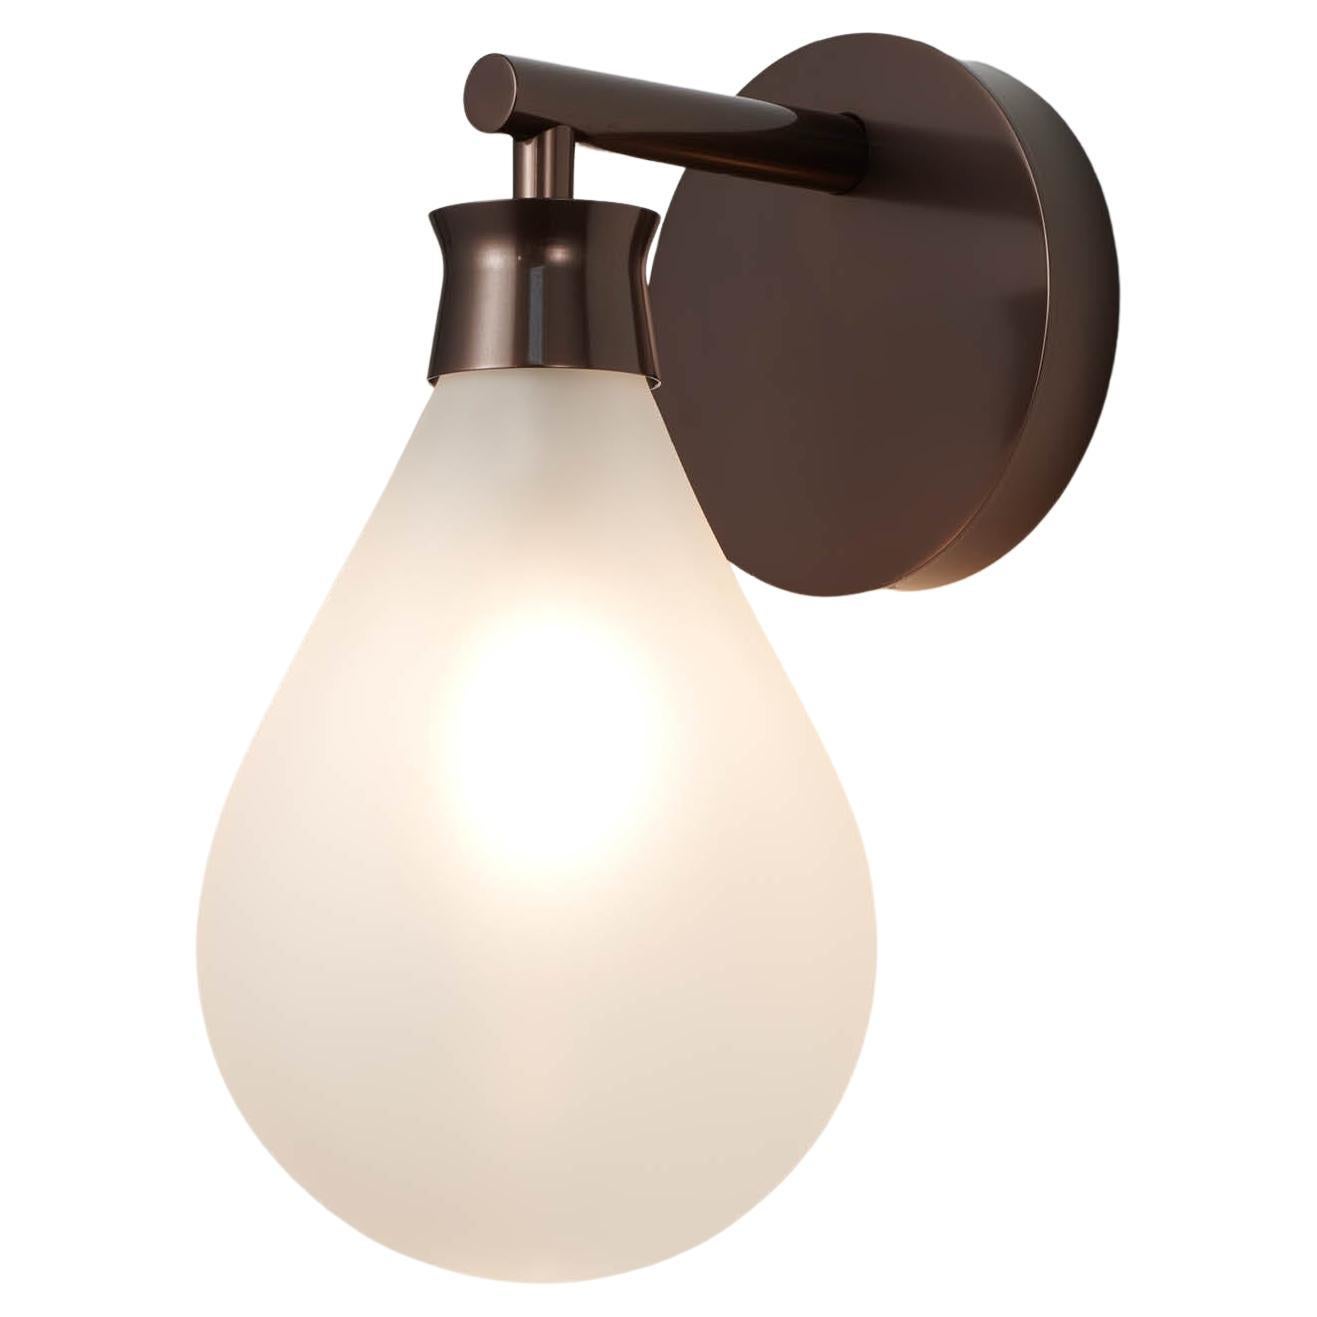 Cintola Wall Light in Satin Bronze with Frosted Handblown Glass Globe For Sale